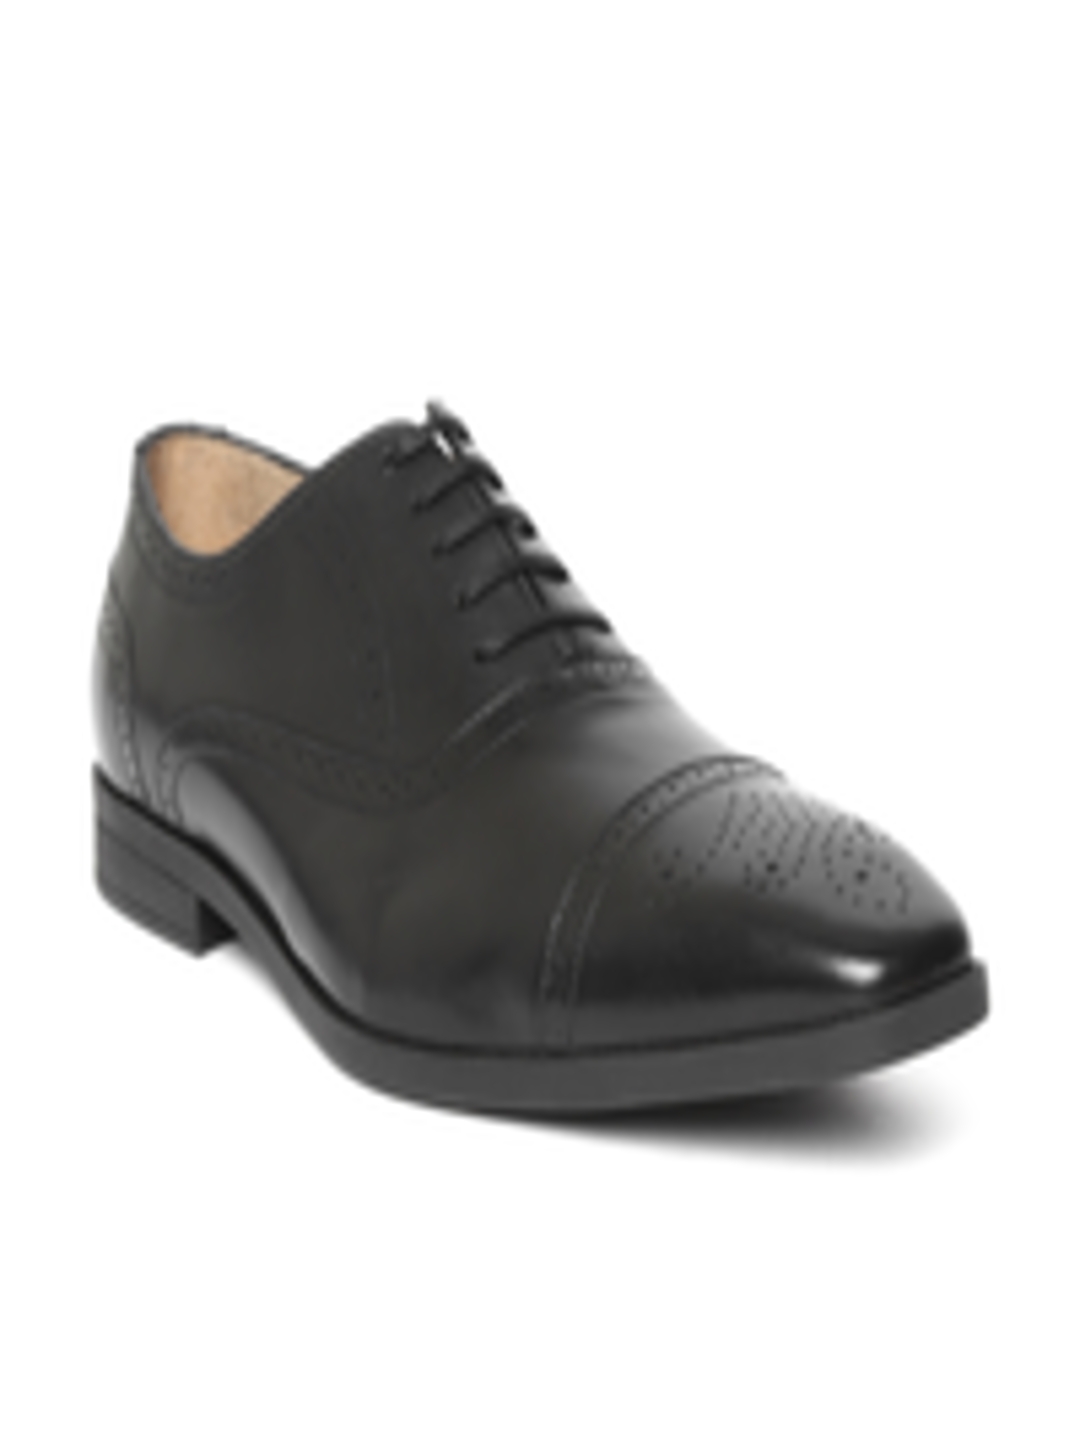 Buy Louis Philippe Men Black Leather Formal Brogues - Formal Shoes for Men 8628713 | Myntra